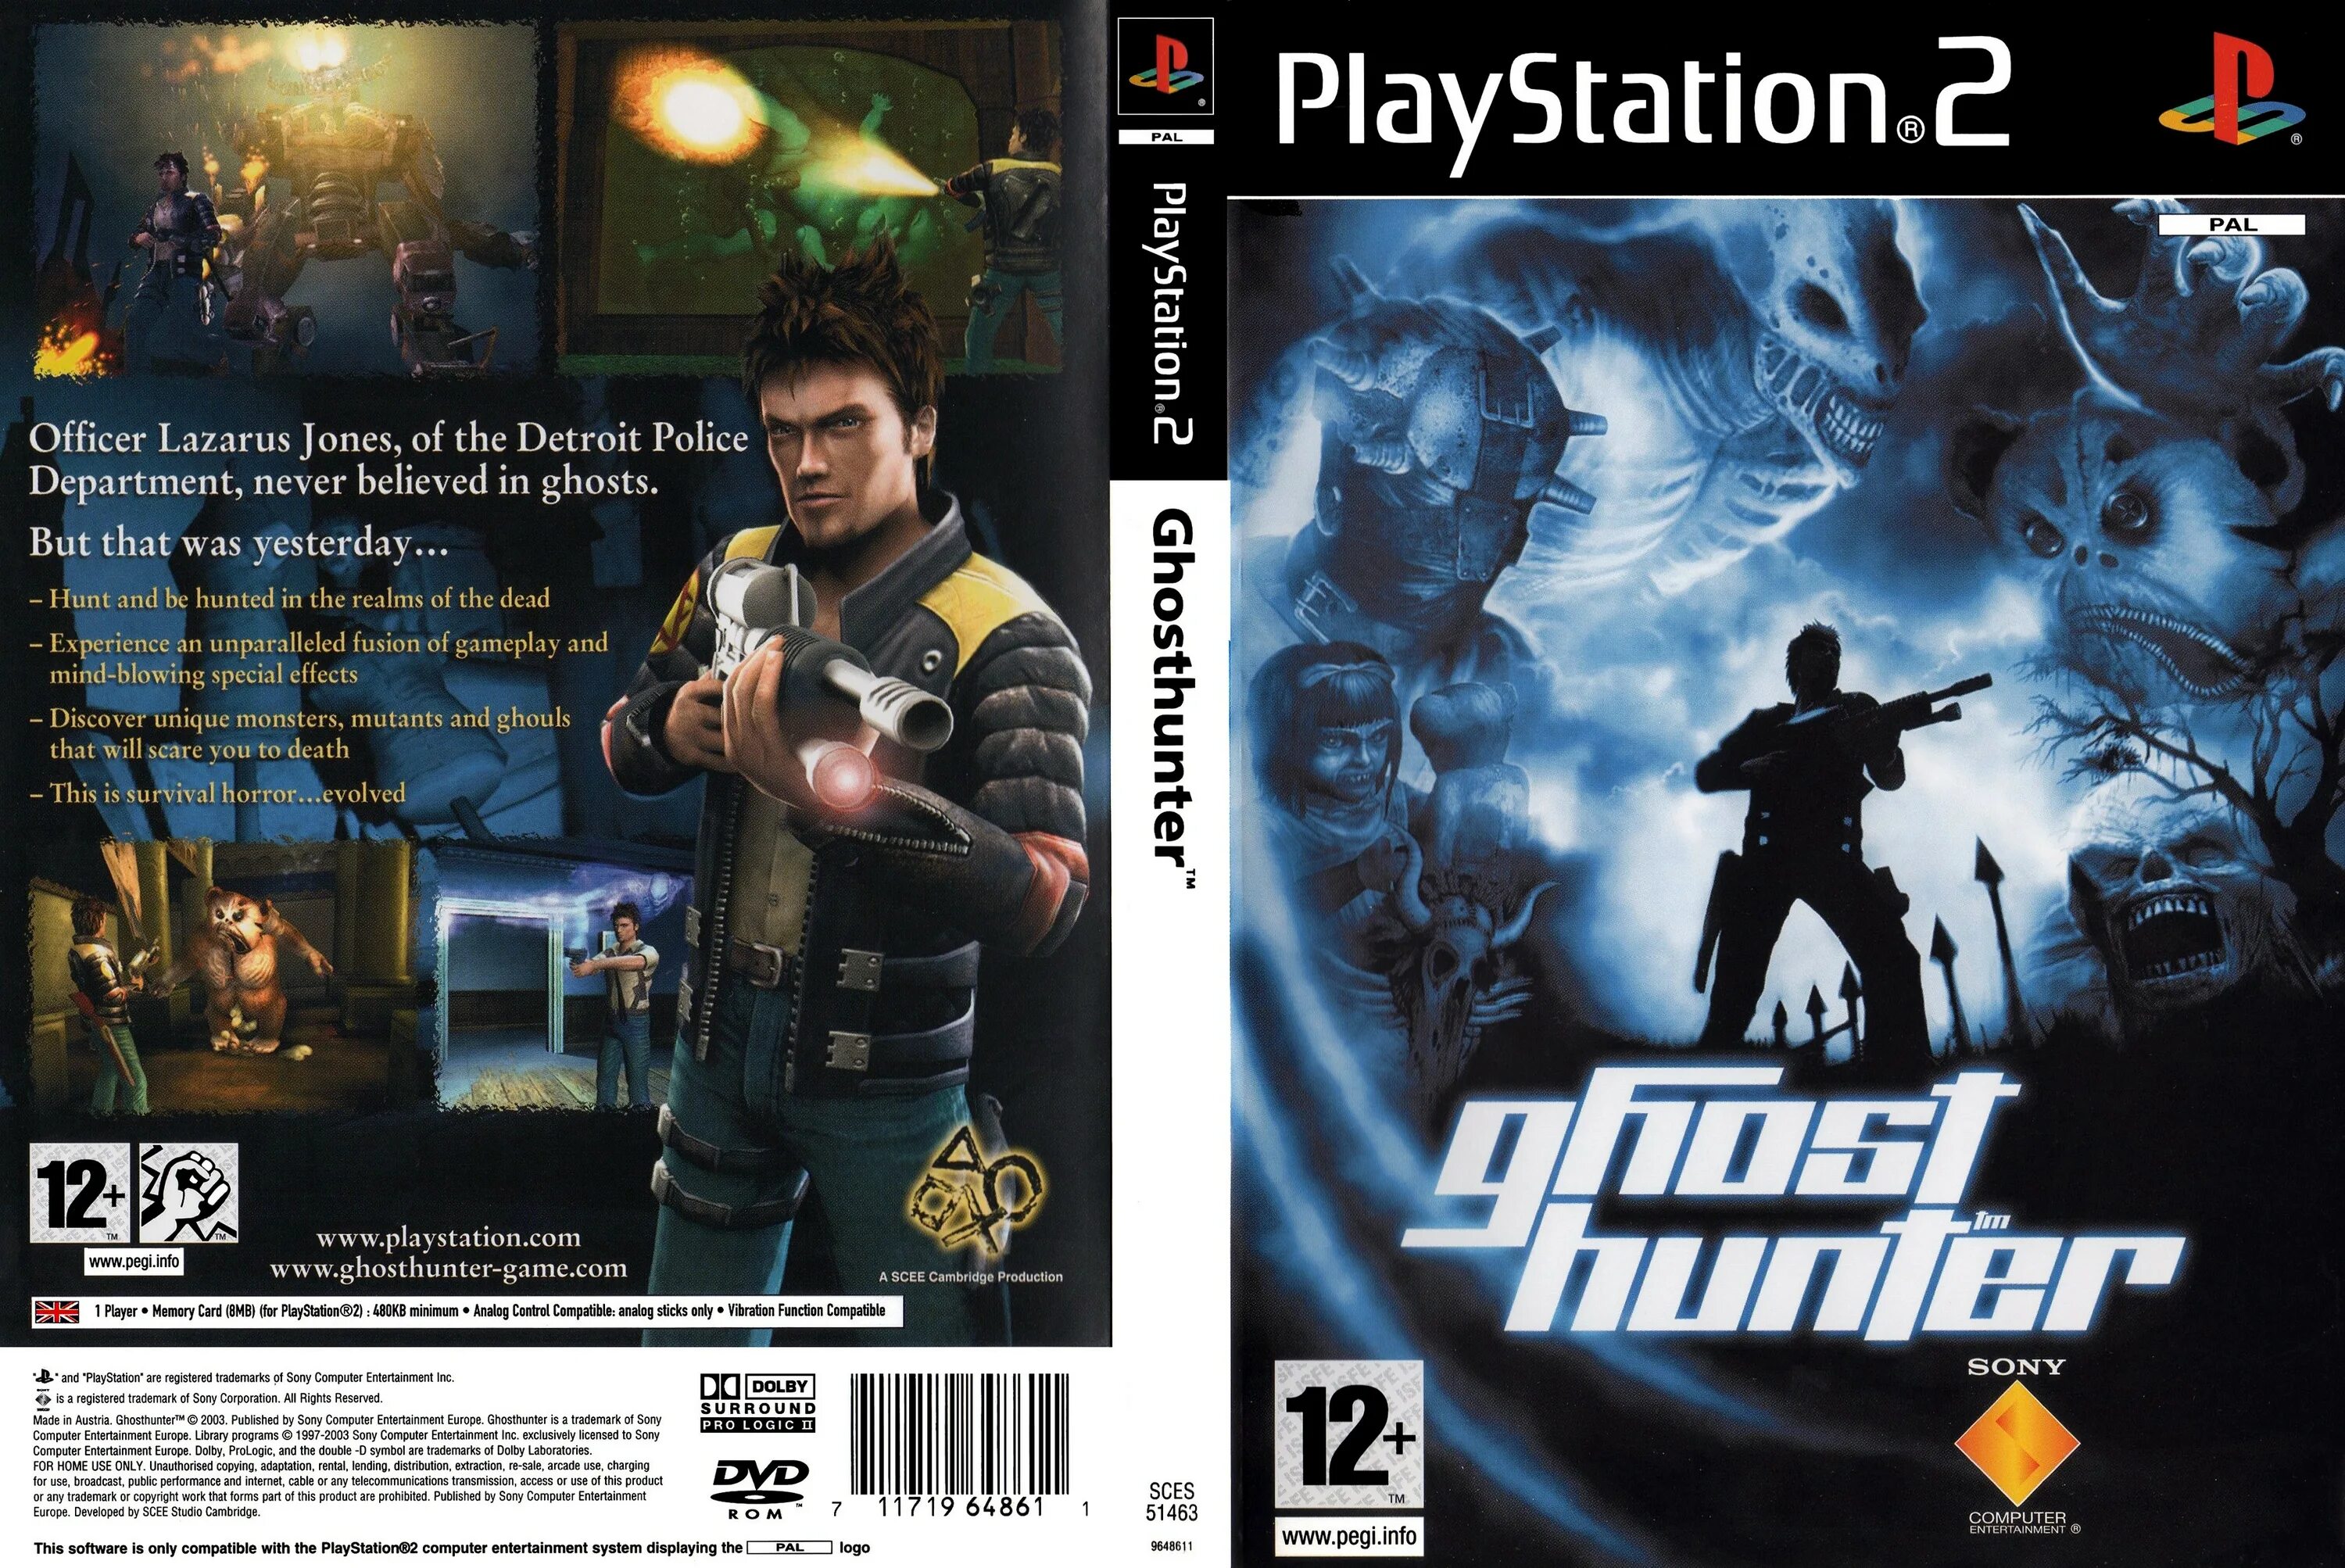 Ghost Hunter ps2 обложка. Ghost Hunter ps2 диск. Ghost Hunter ps2 вкладыш. Ghost Hunter ps2 Cover. Playstation 2 игры 1